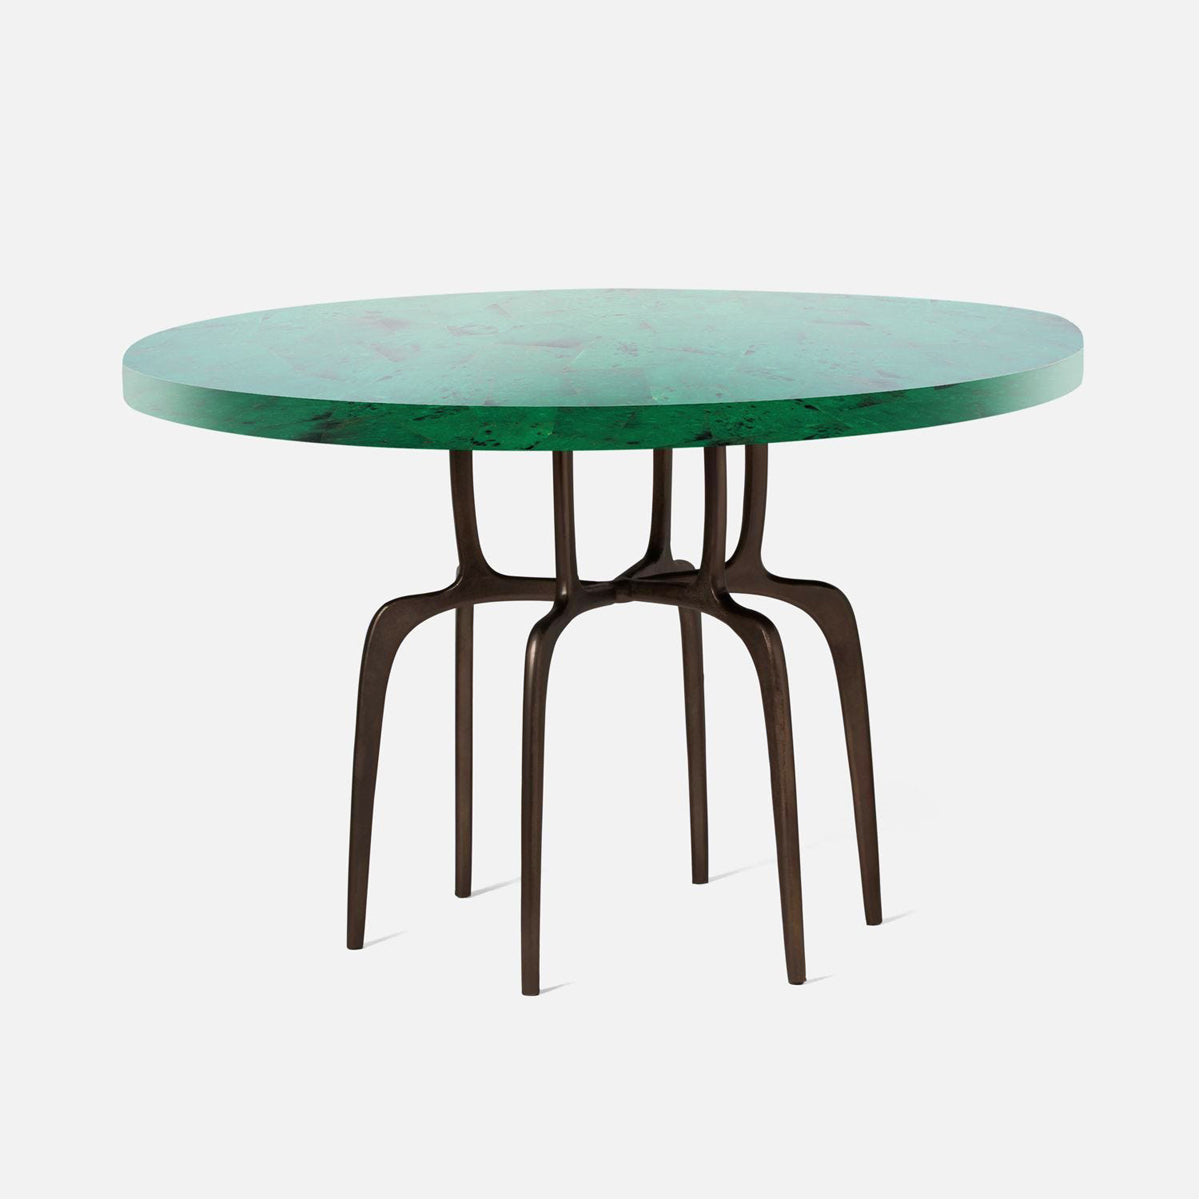 Made Goods Cyrano Metal Dining Table in Emerald Shell